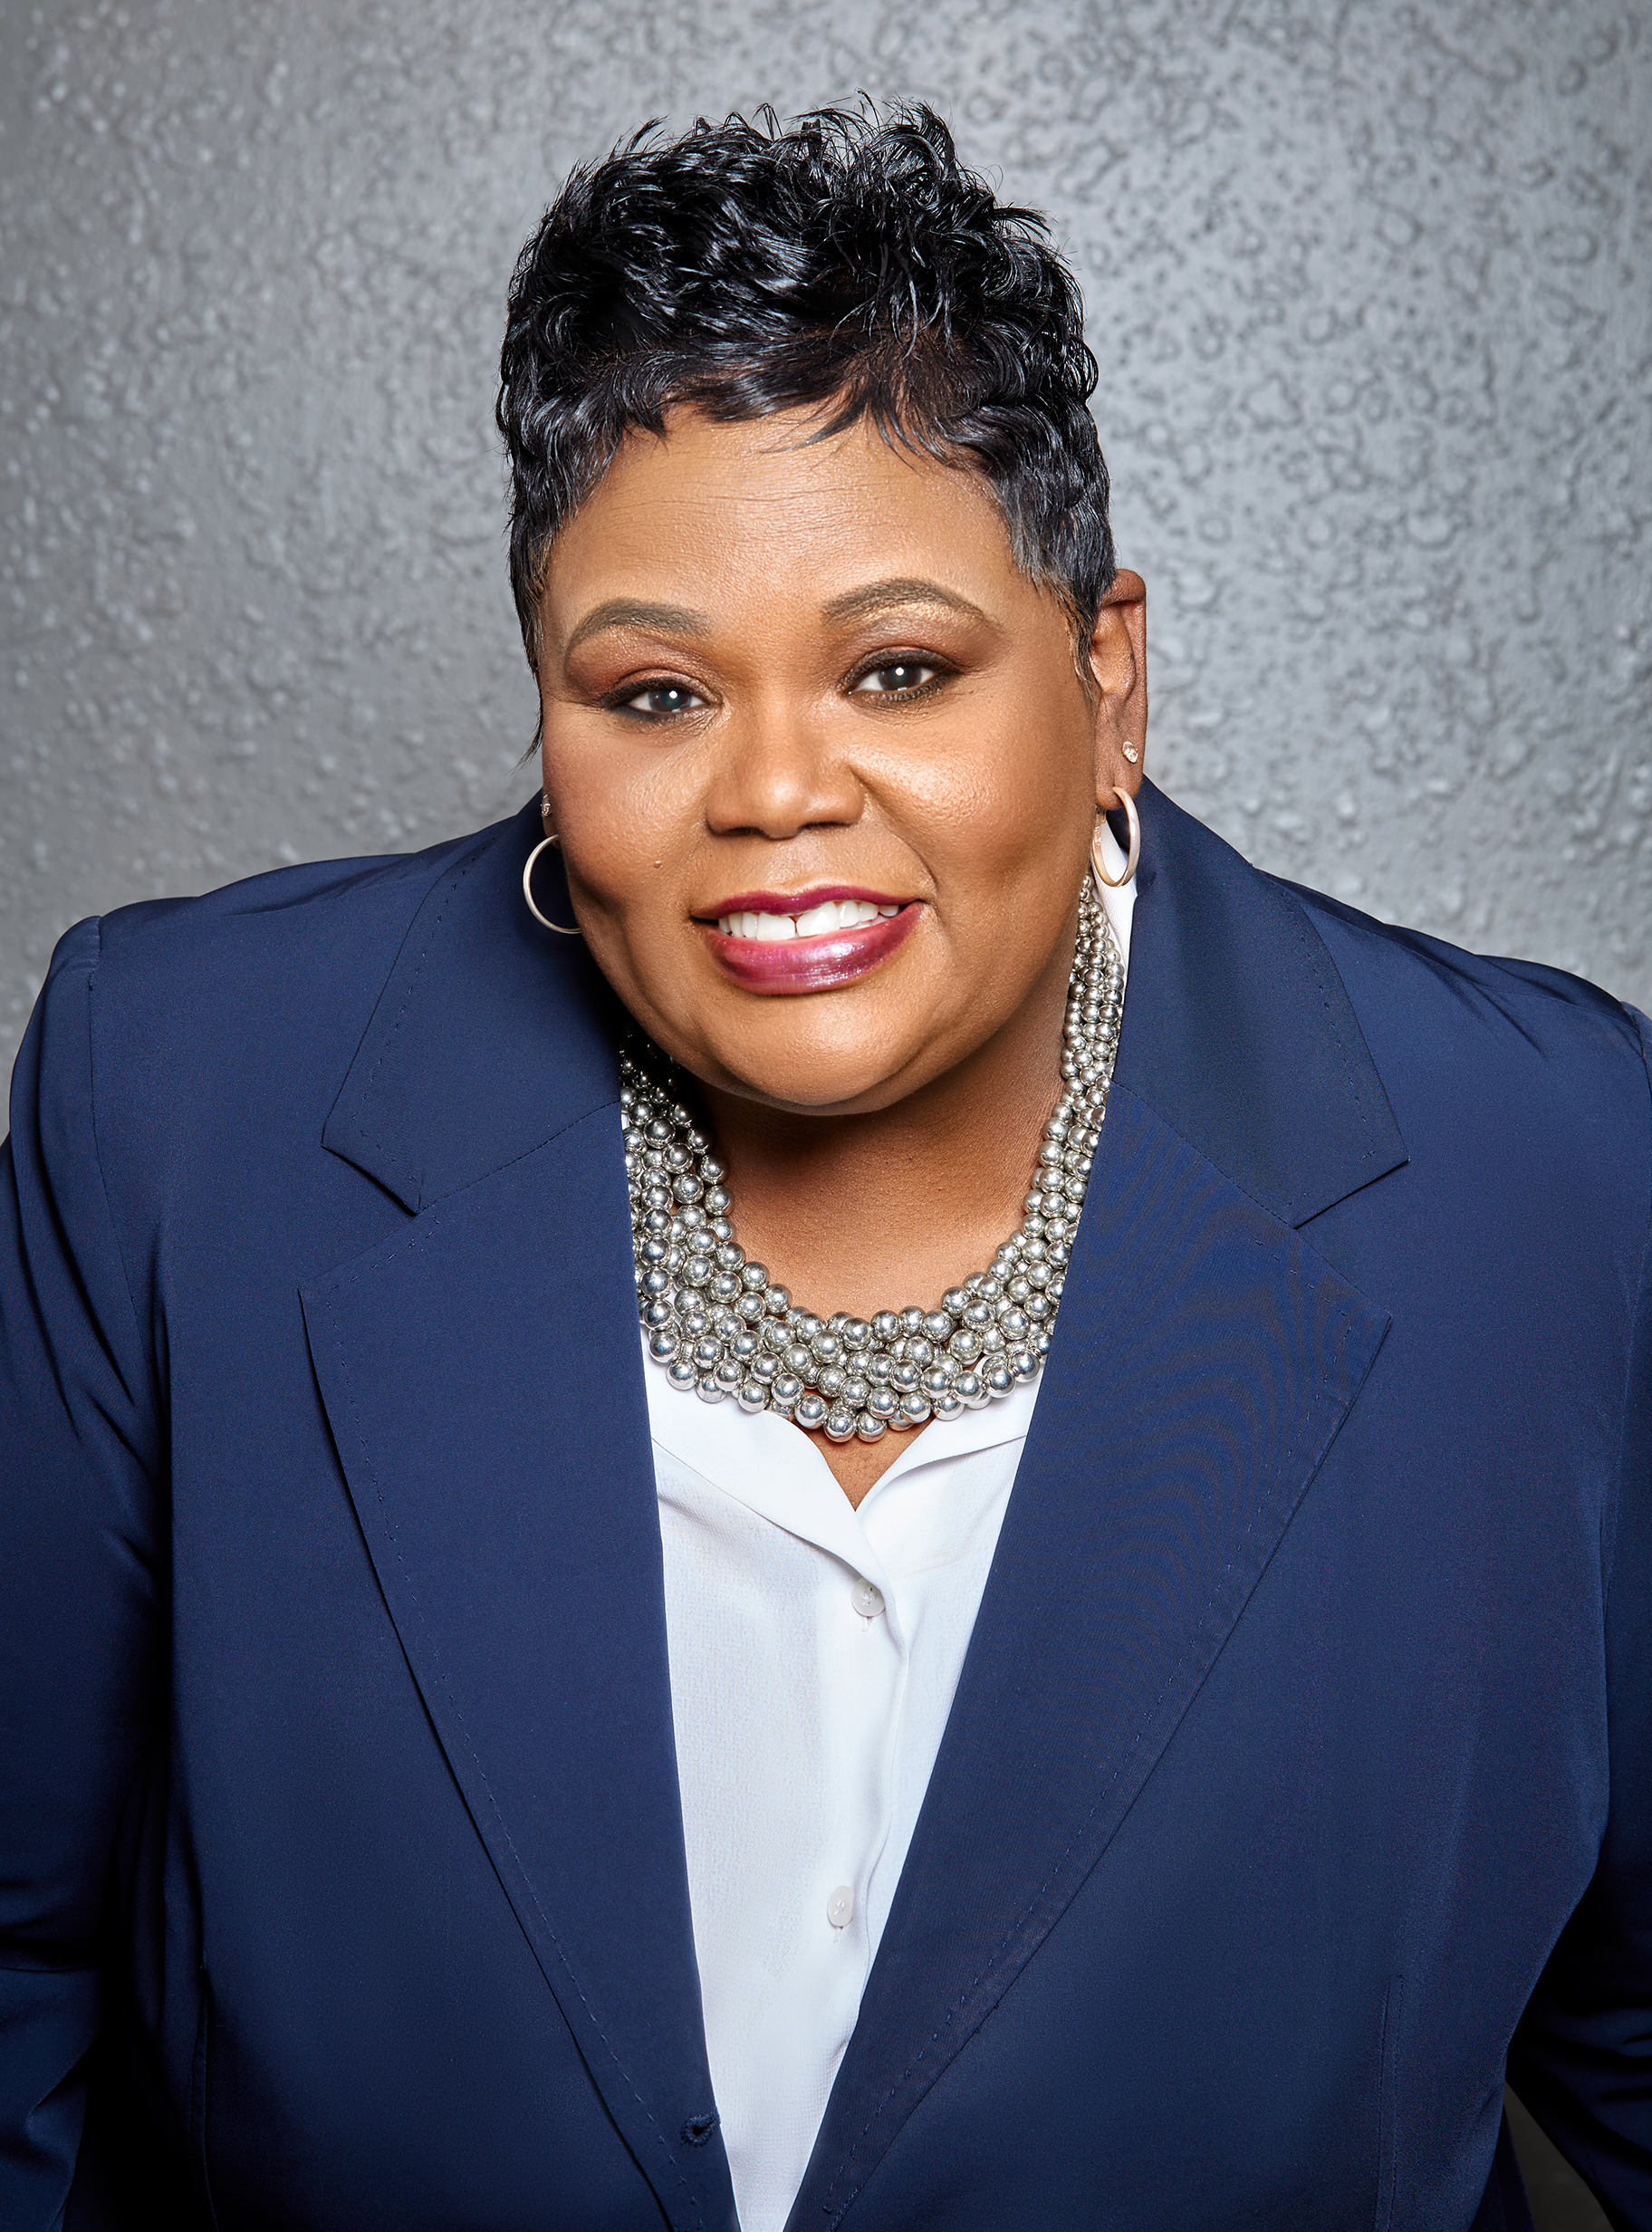 professional photo fo Angela M. Prince in a blue blazer and white blouse smiling for the camera